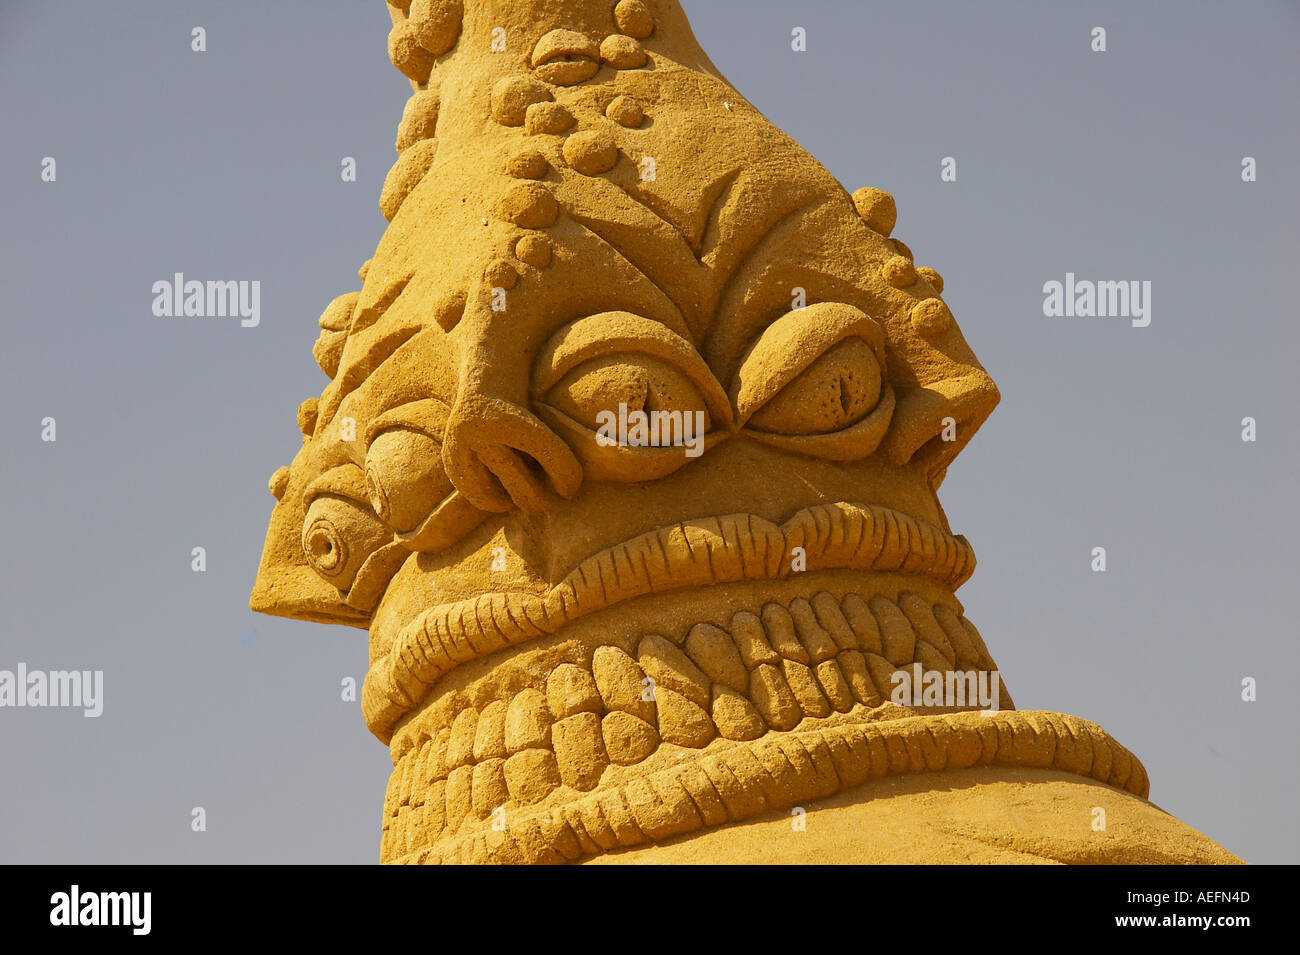 sand sculpture of giant octopus Stock Photo